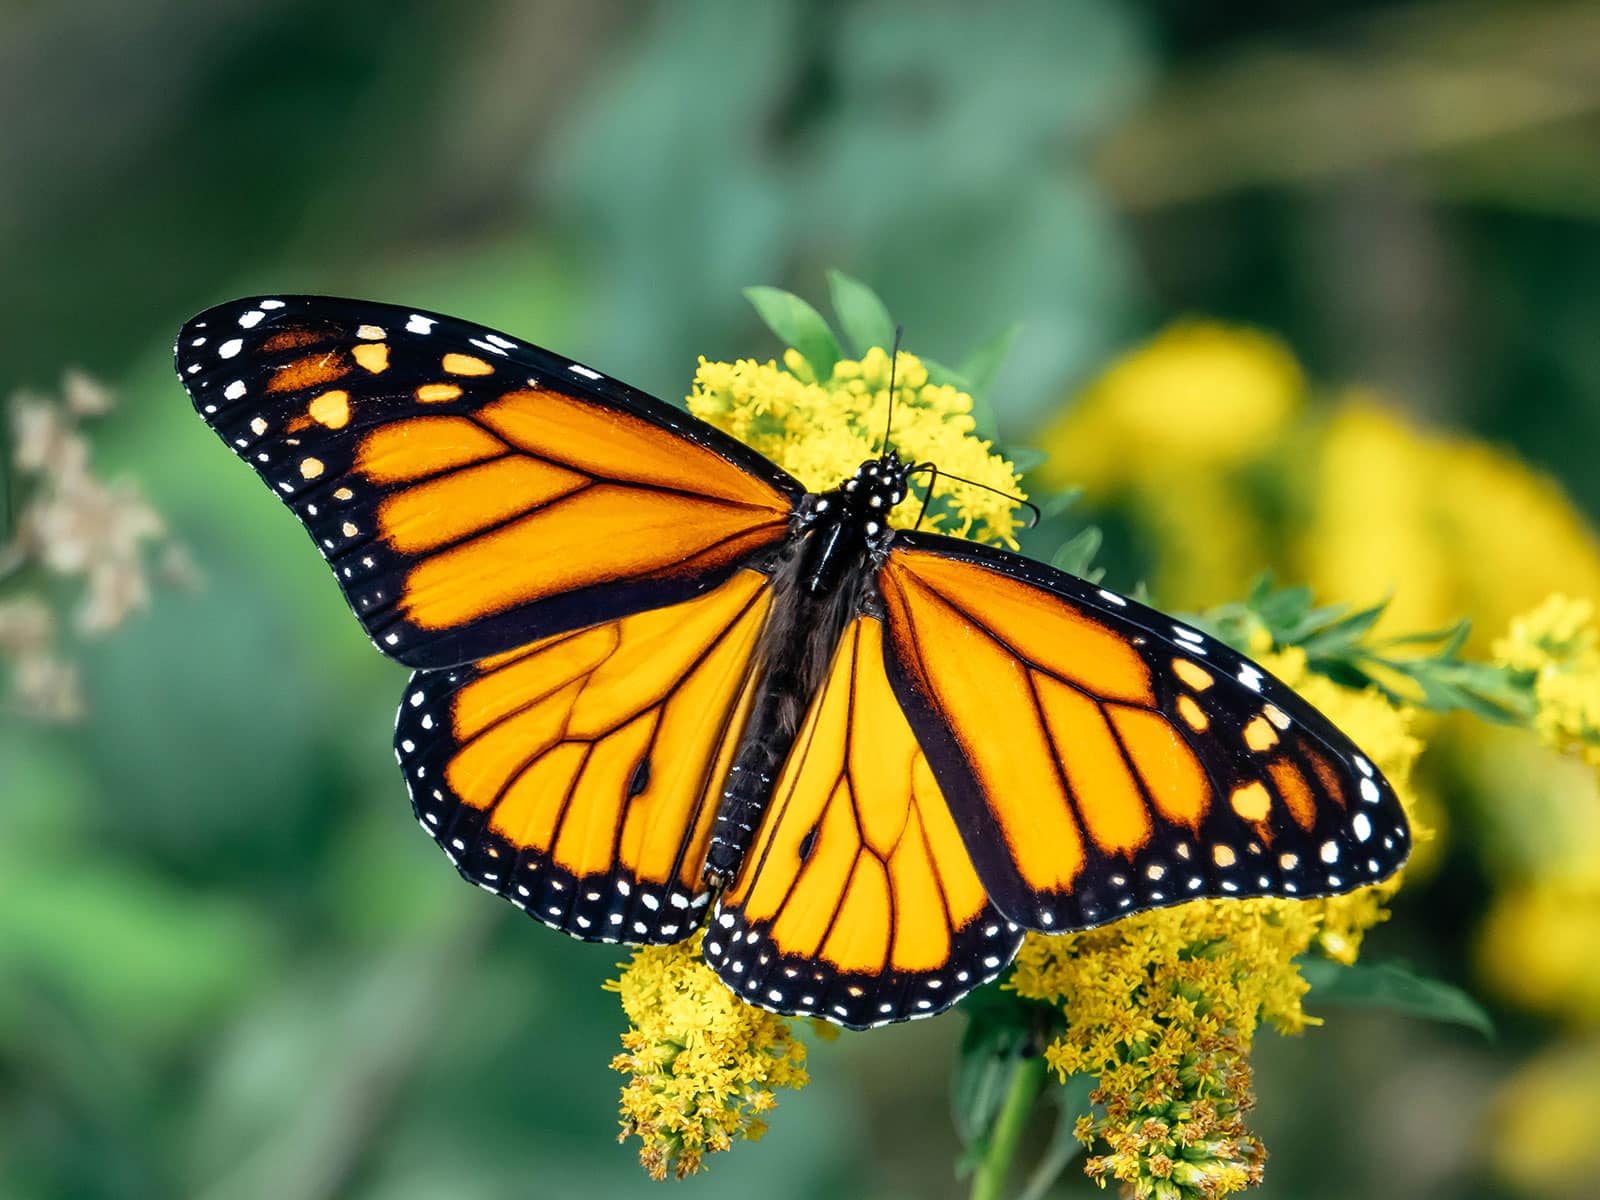 A monarch butterfly feeding on a cluster of tiny yellow flowers